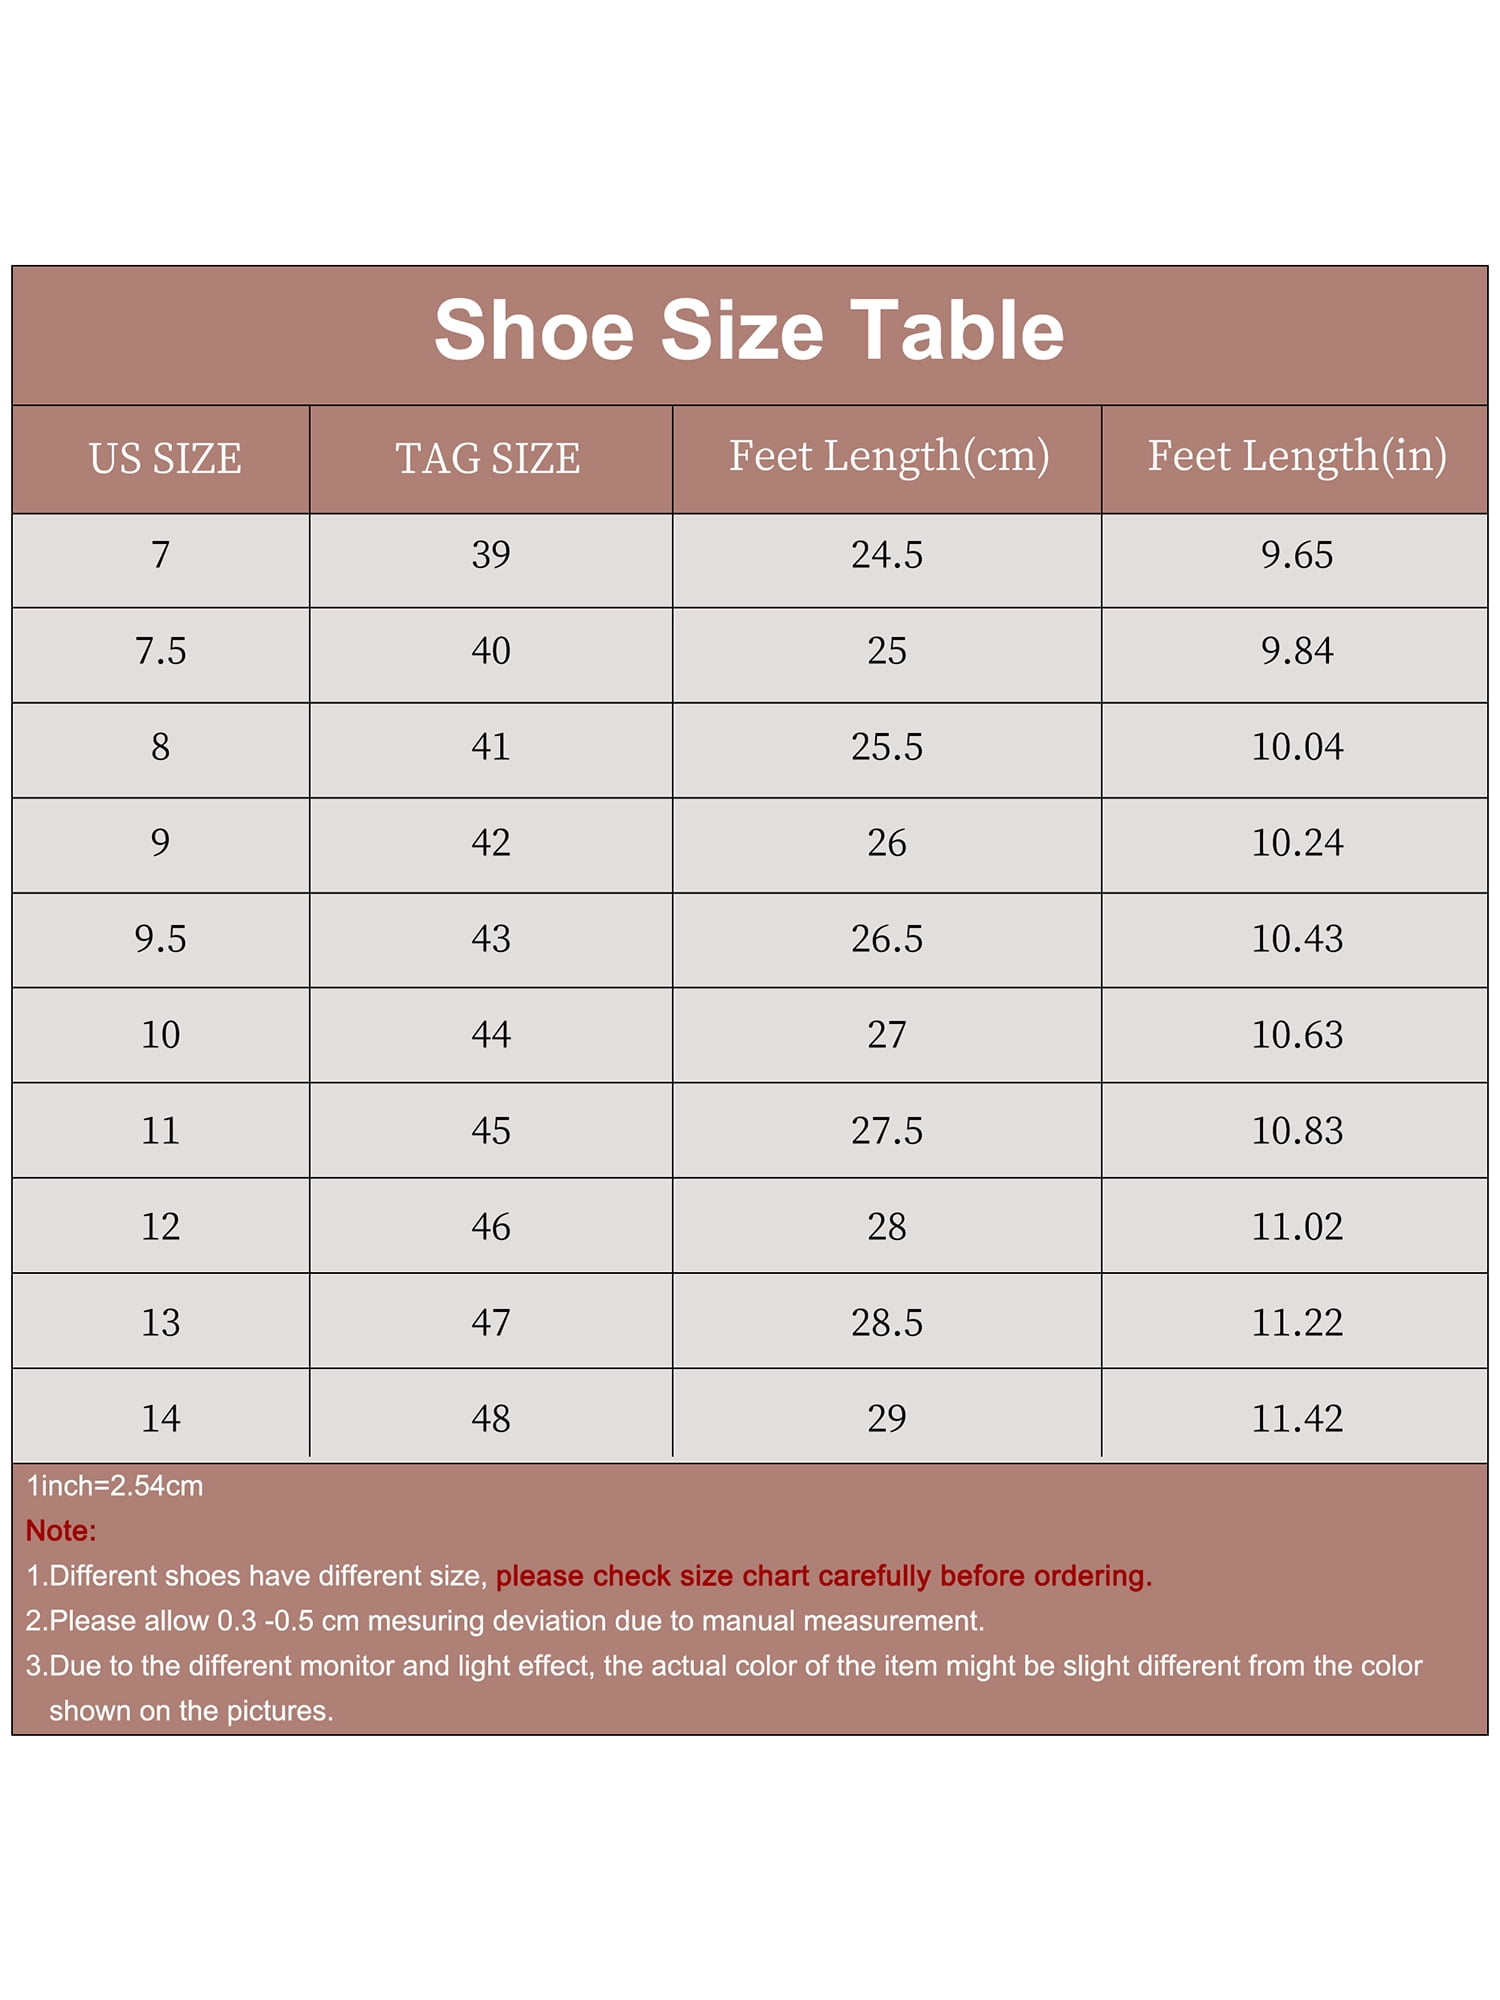 Louis Vuitton Shoe Size Chart: Are They True to Size?